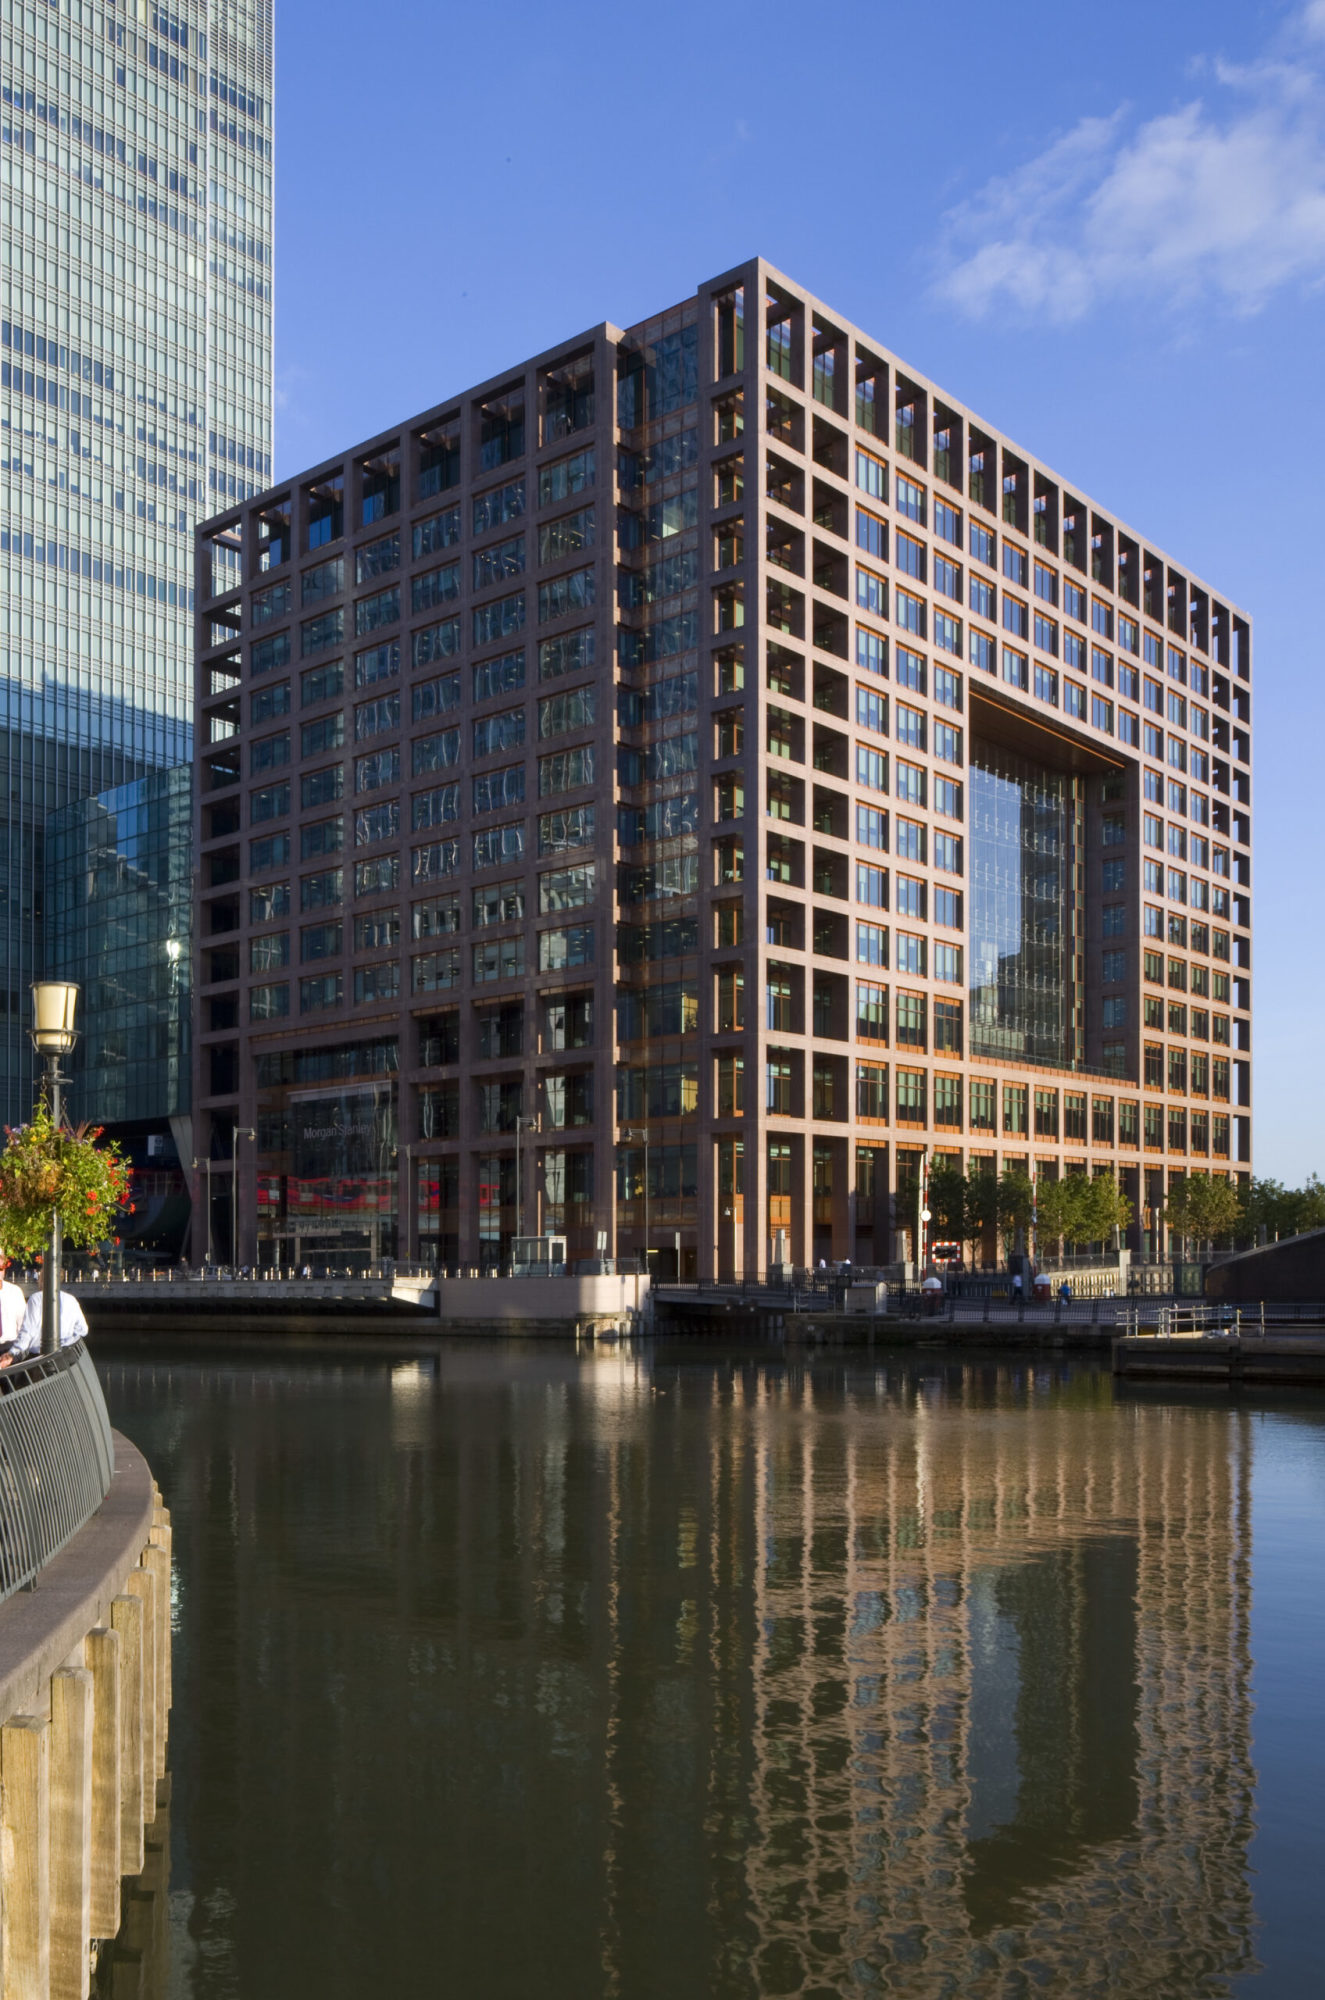 Morgan Stanley Signs Ten Year Lease for Canary Wharf HQ